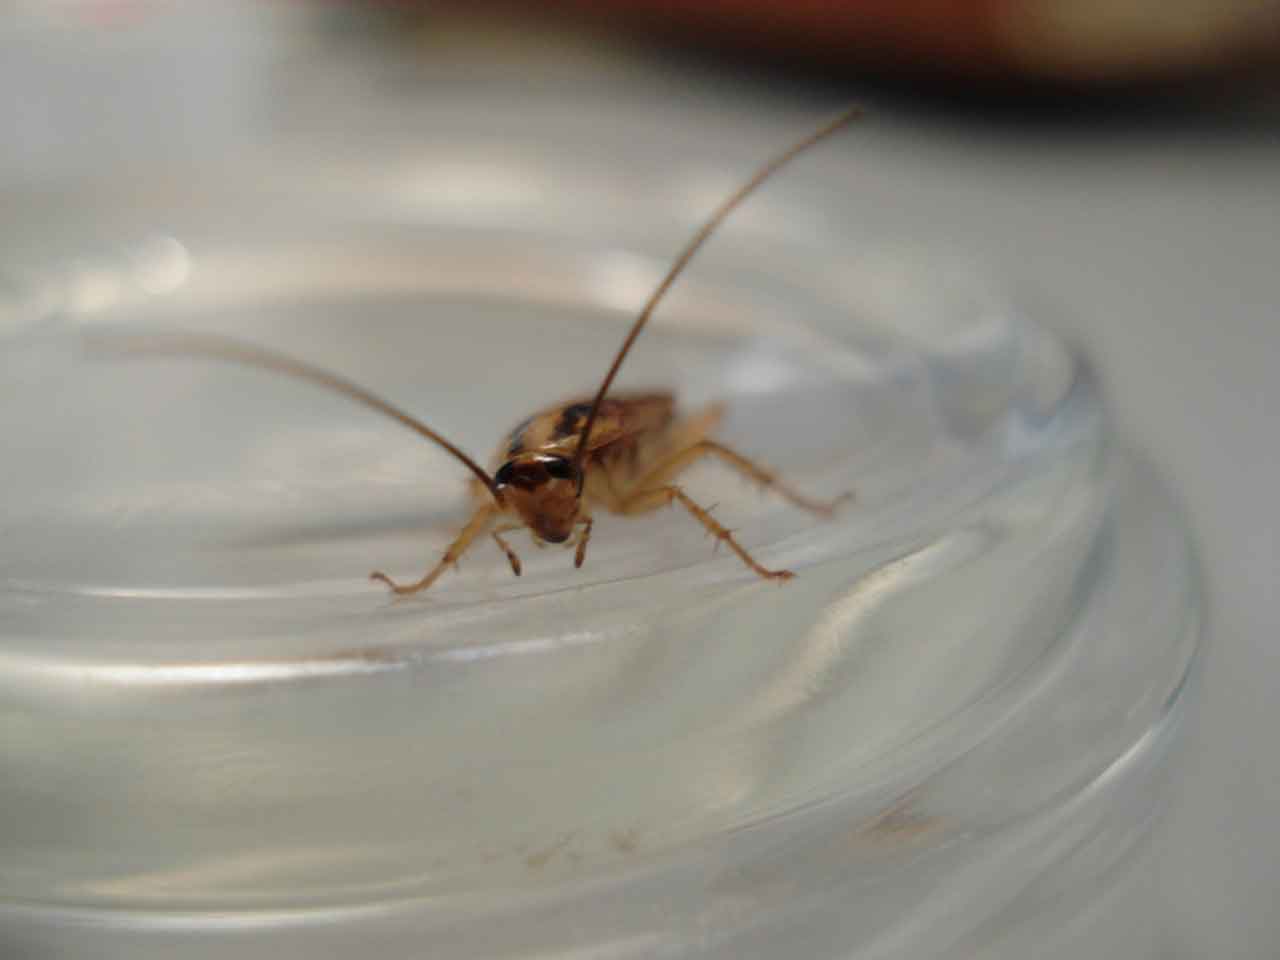 A cockroach on a glass dish